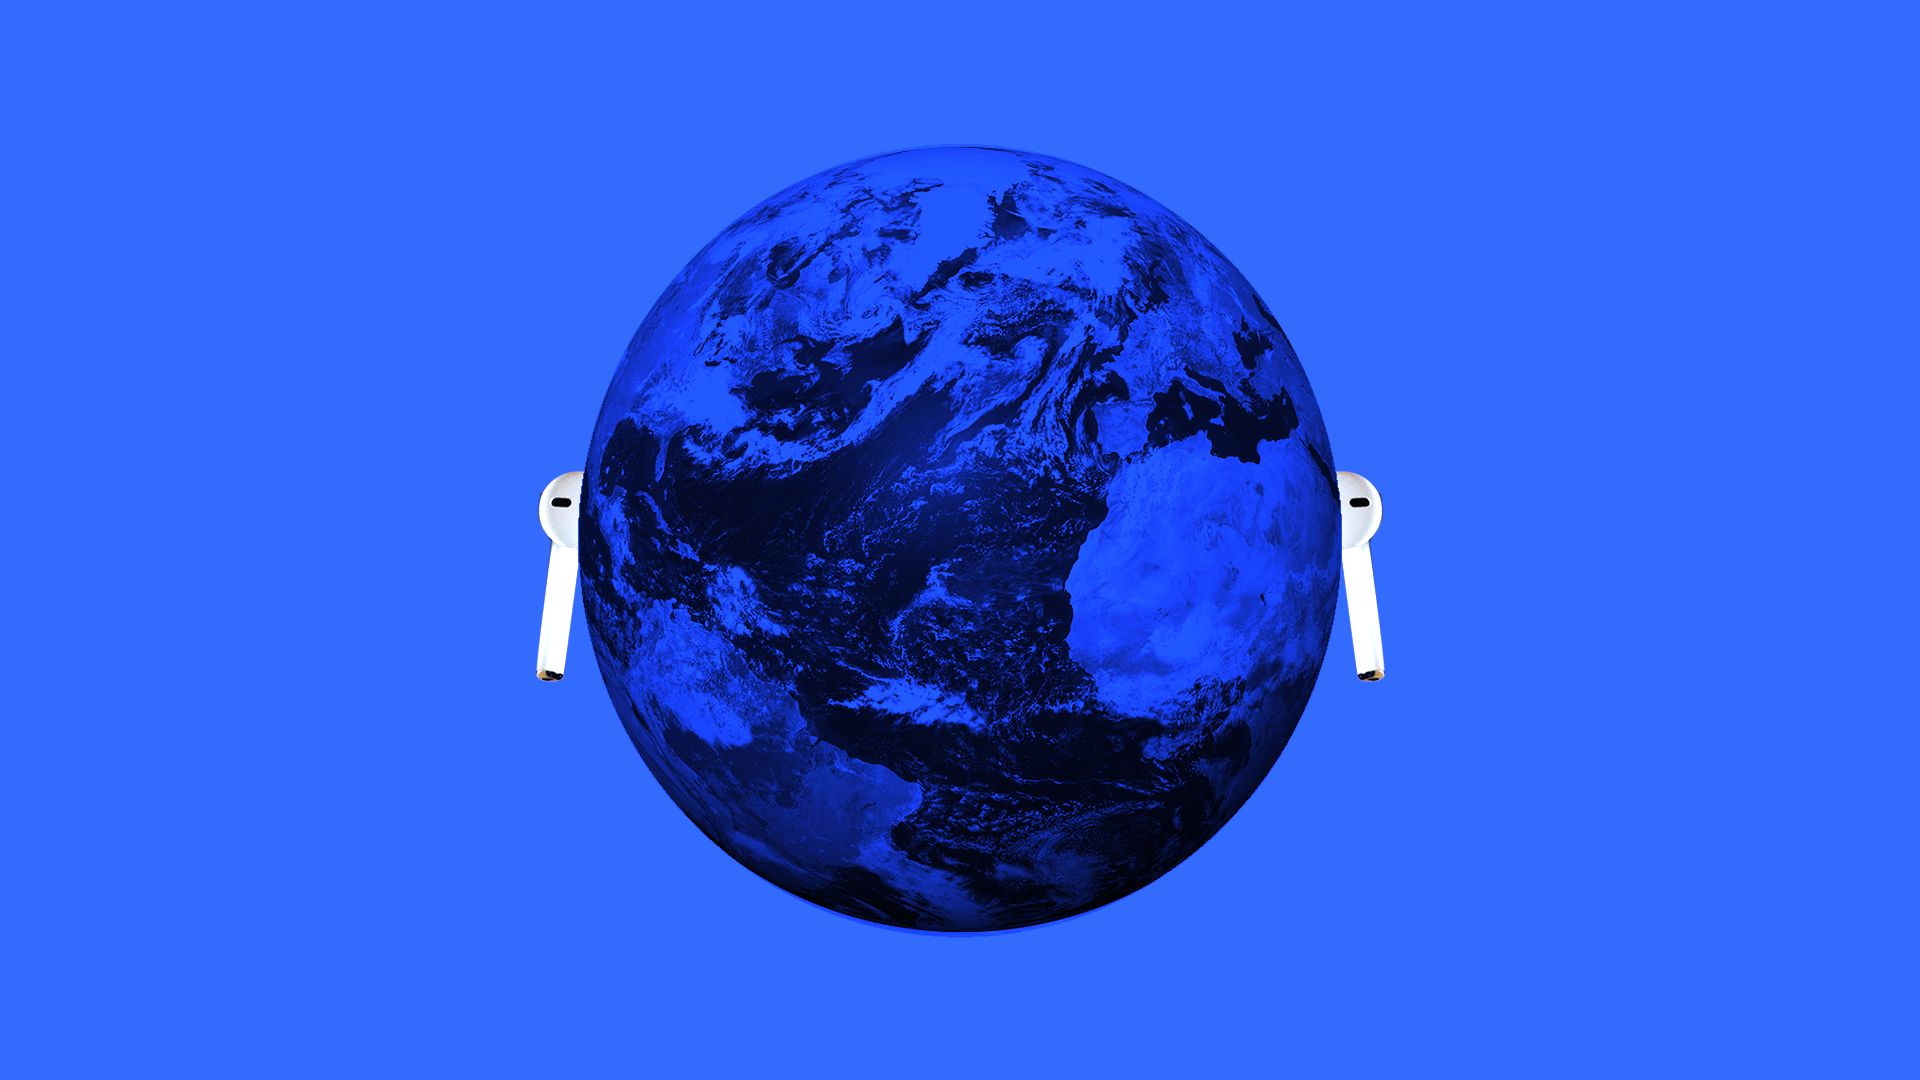 Illustration of the earth wearing airpods